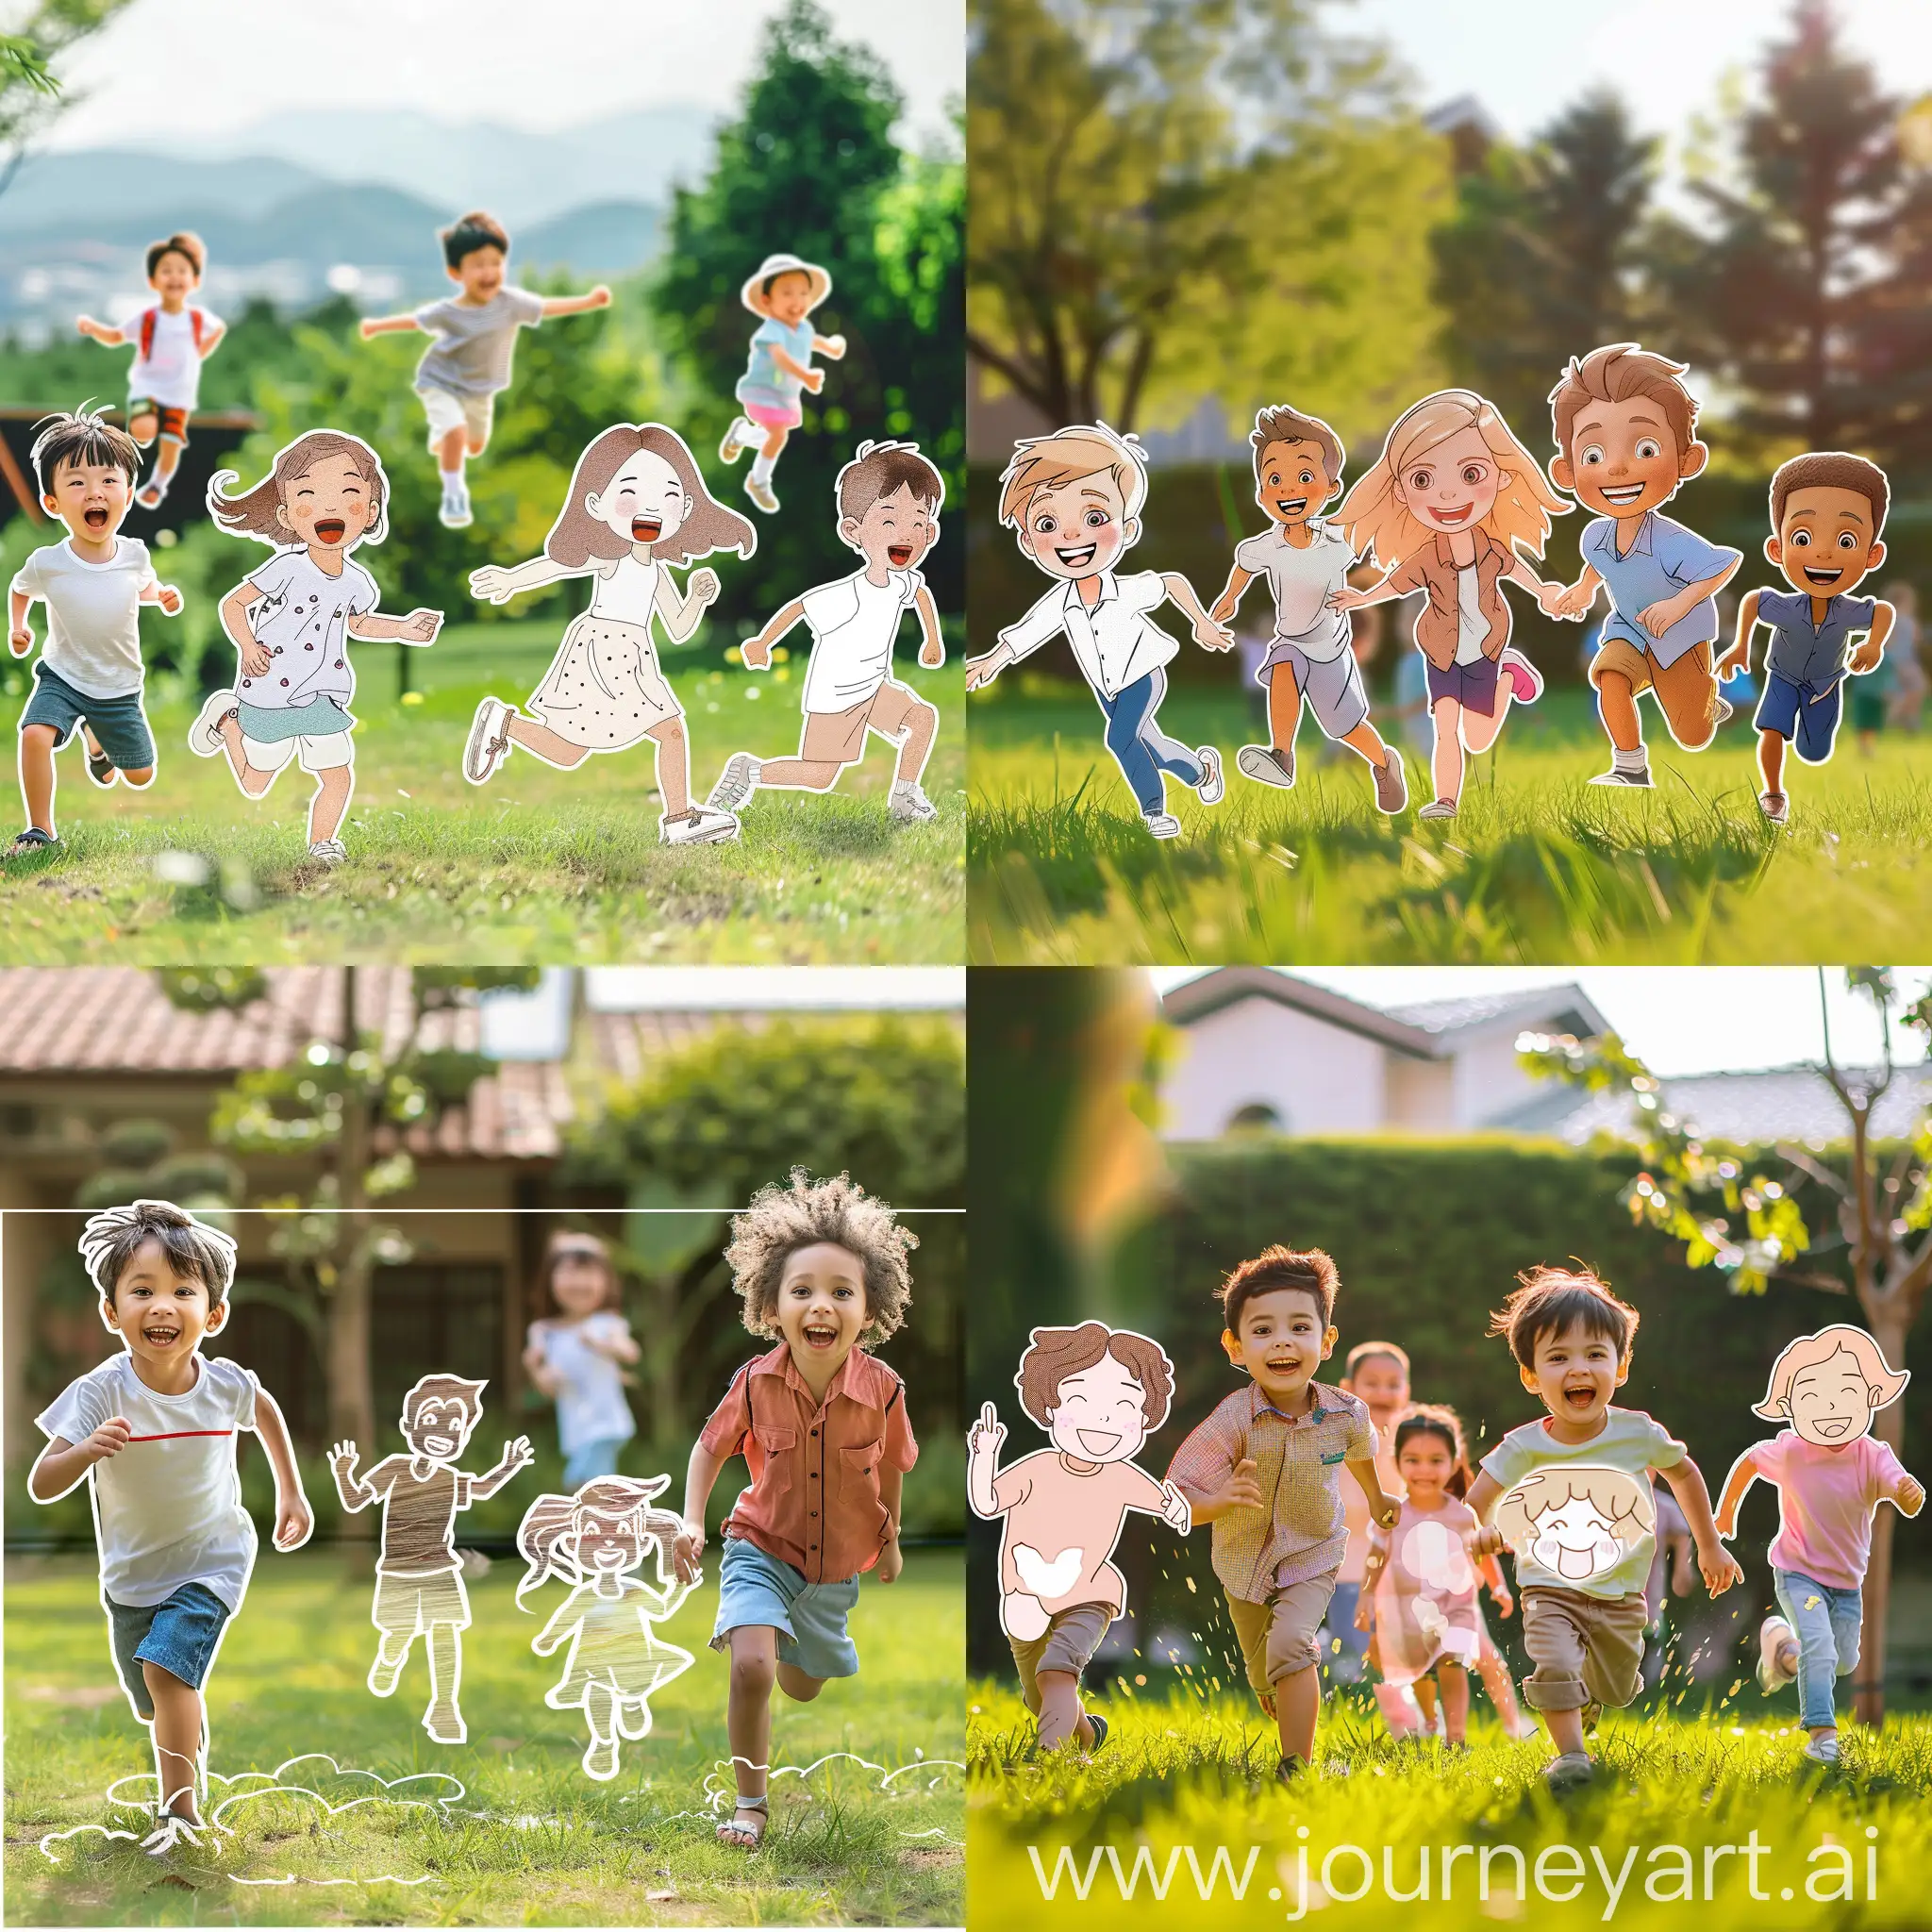 Children are running happily on the grass. In the photos, the characters are smiling, with clear outlines and realistic facial features.